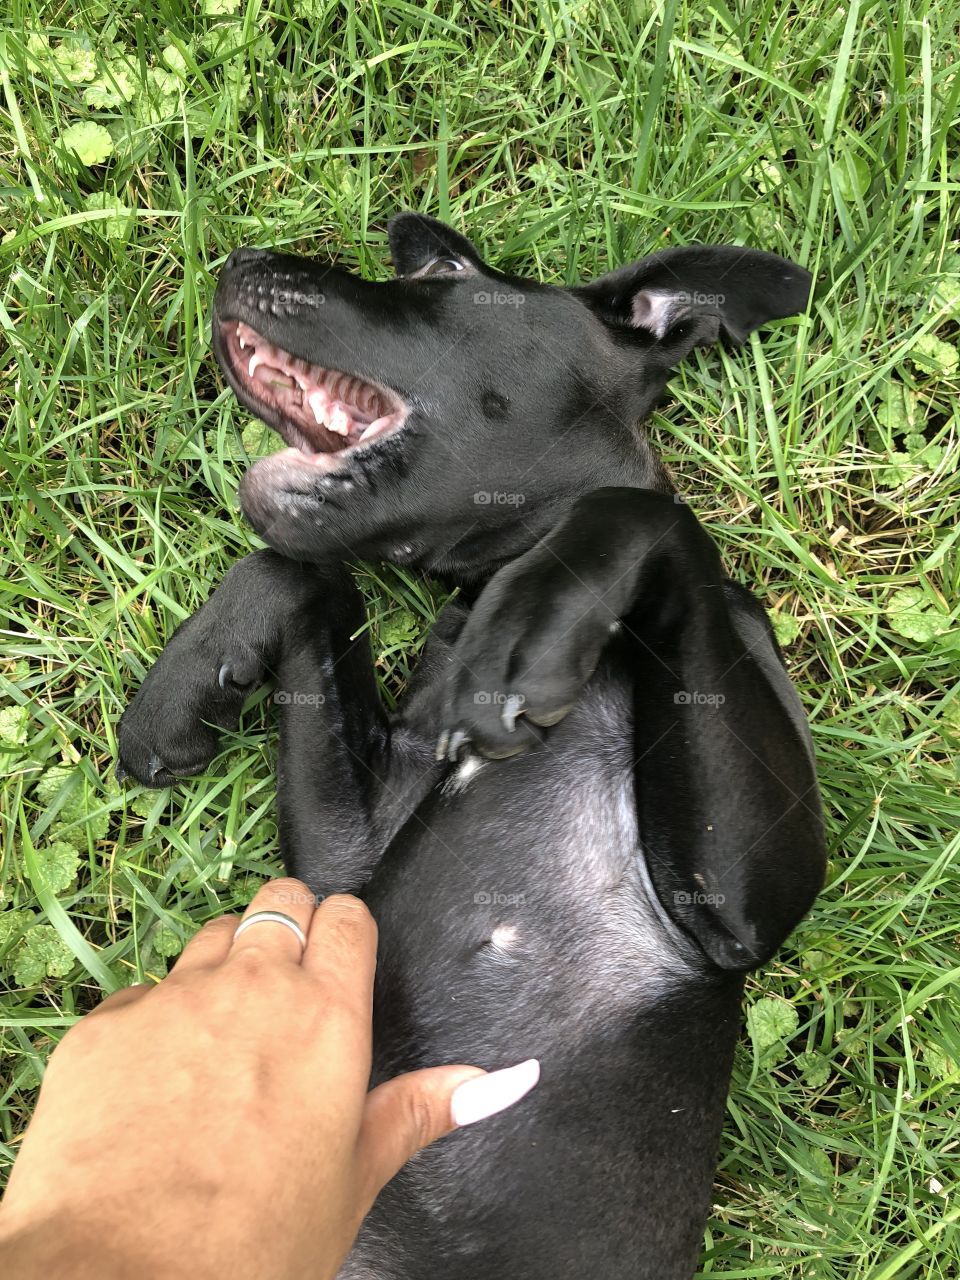 Laughing puppy